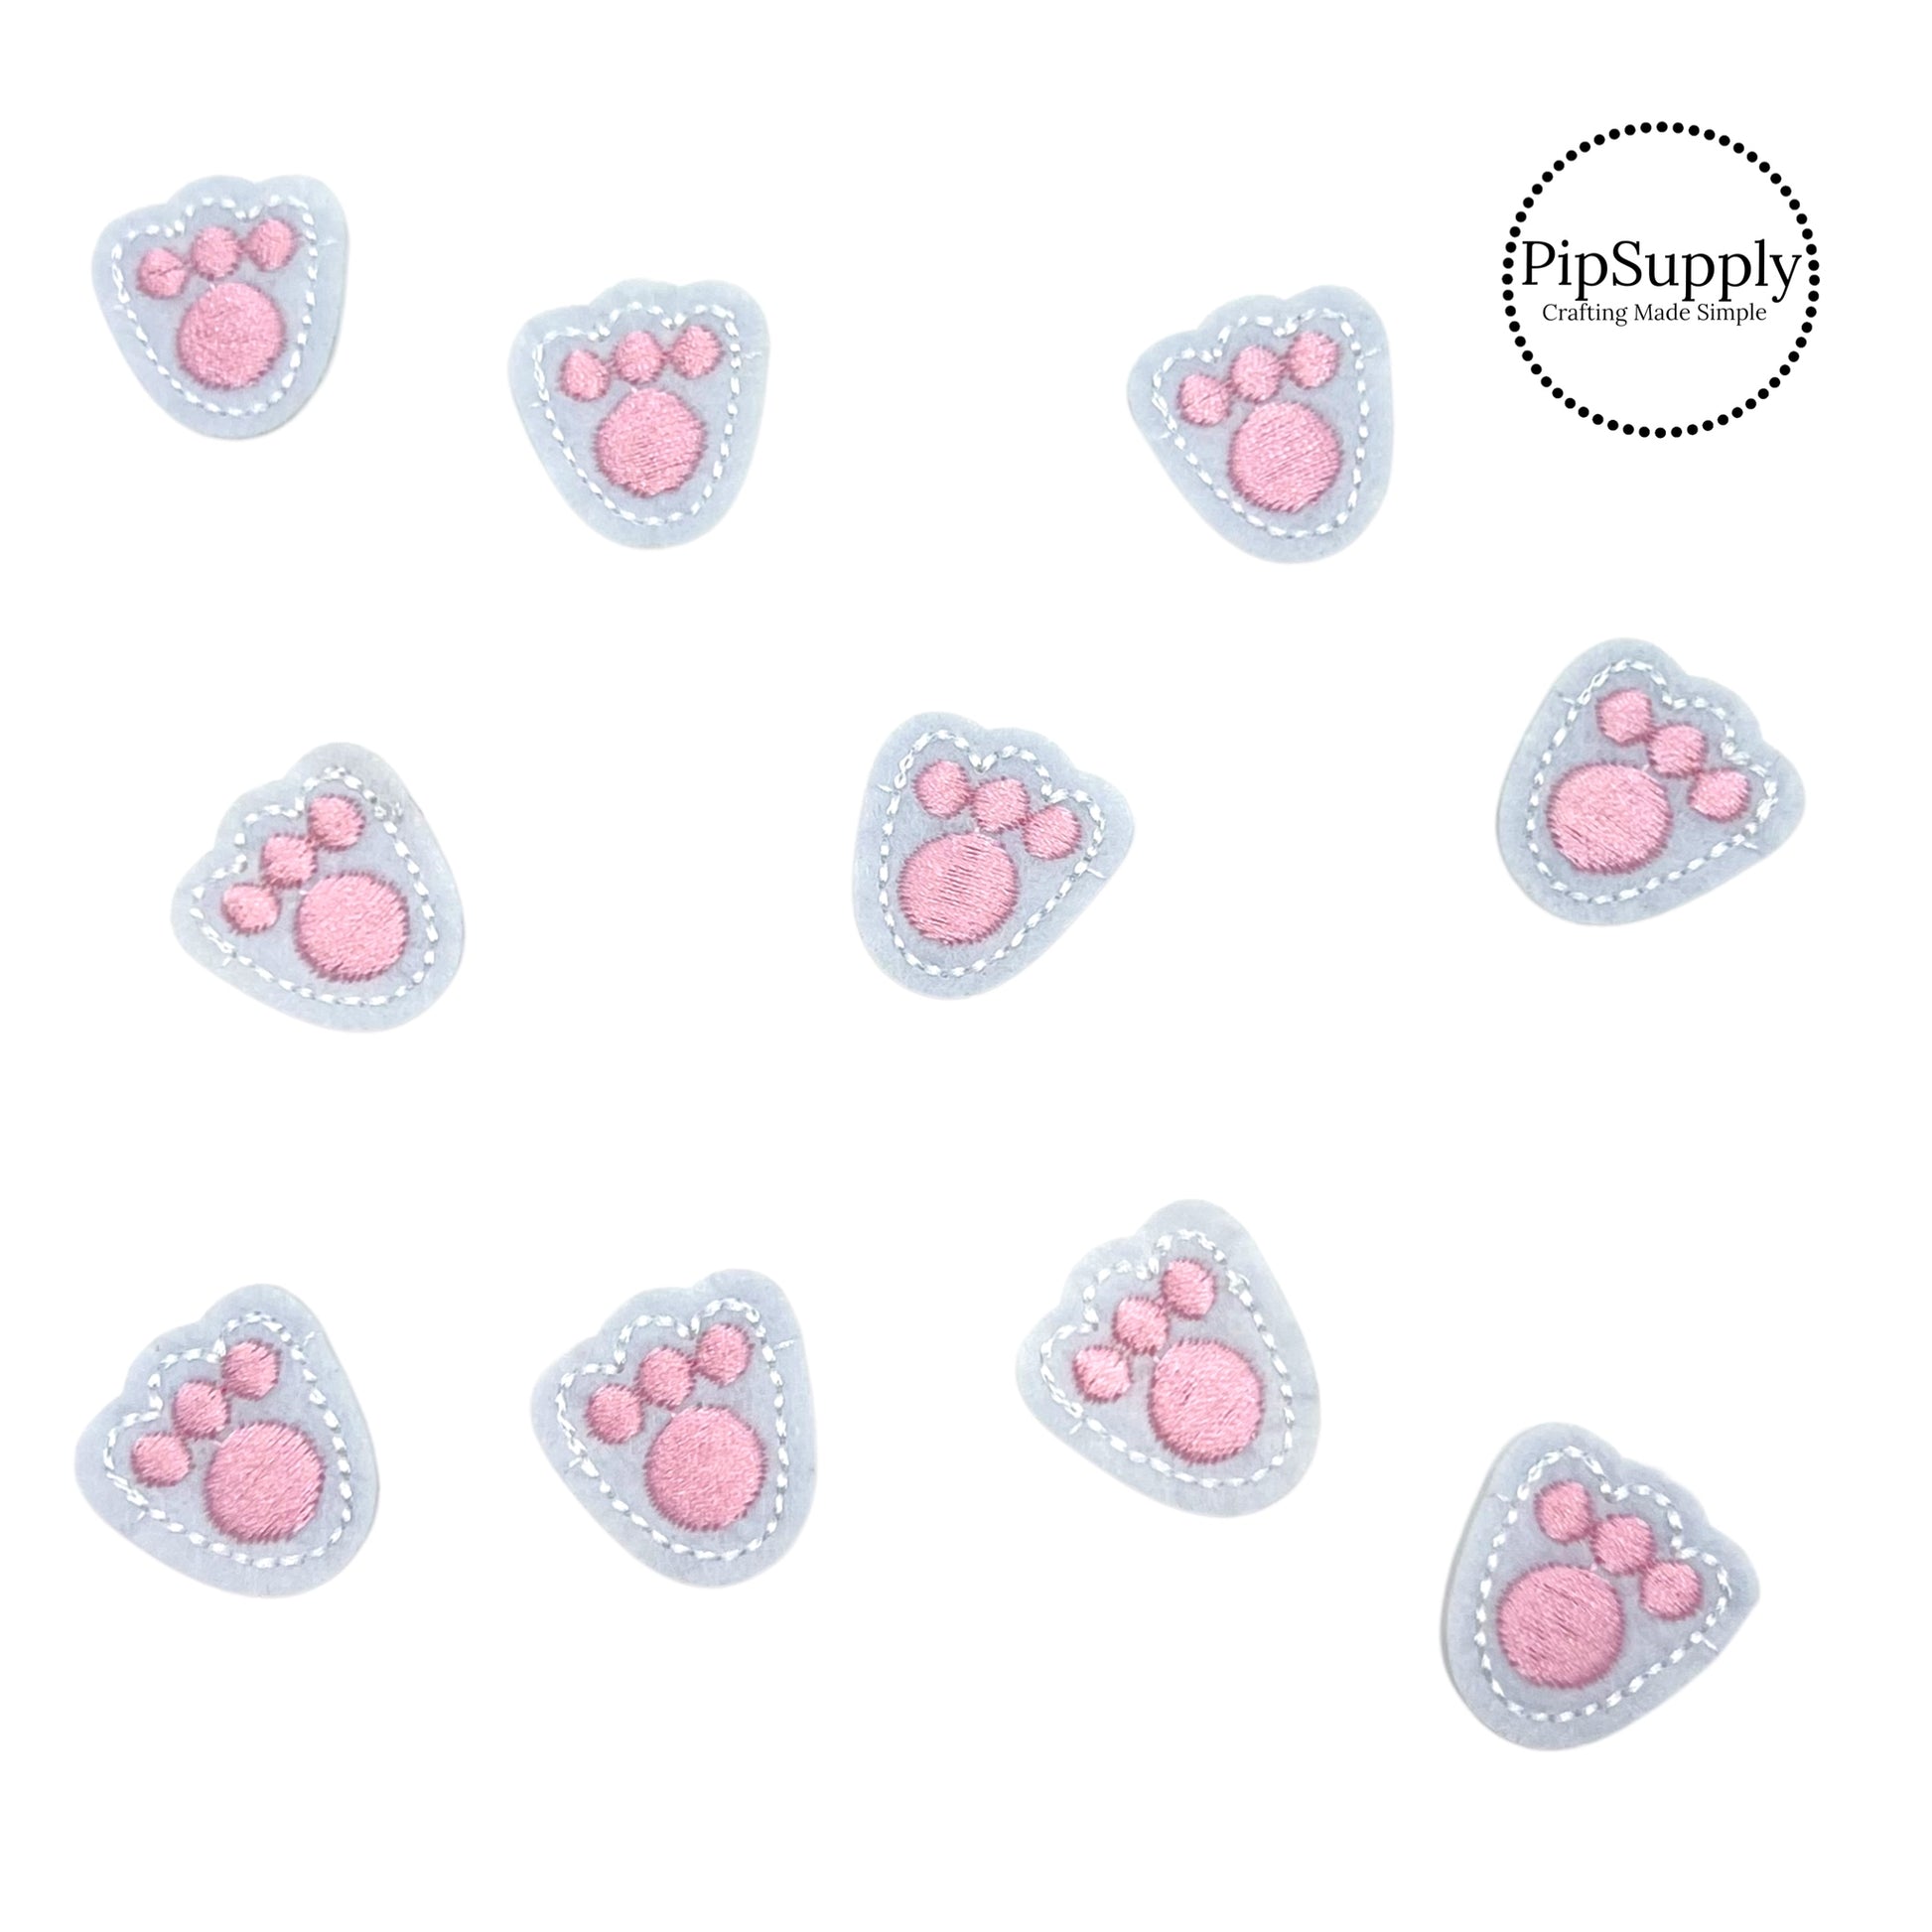 White Felt Iron On Heat transfer with pink bunny paw embroidery